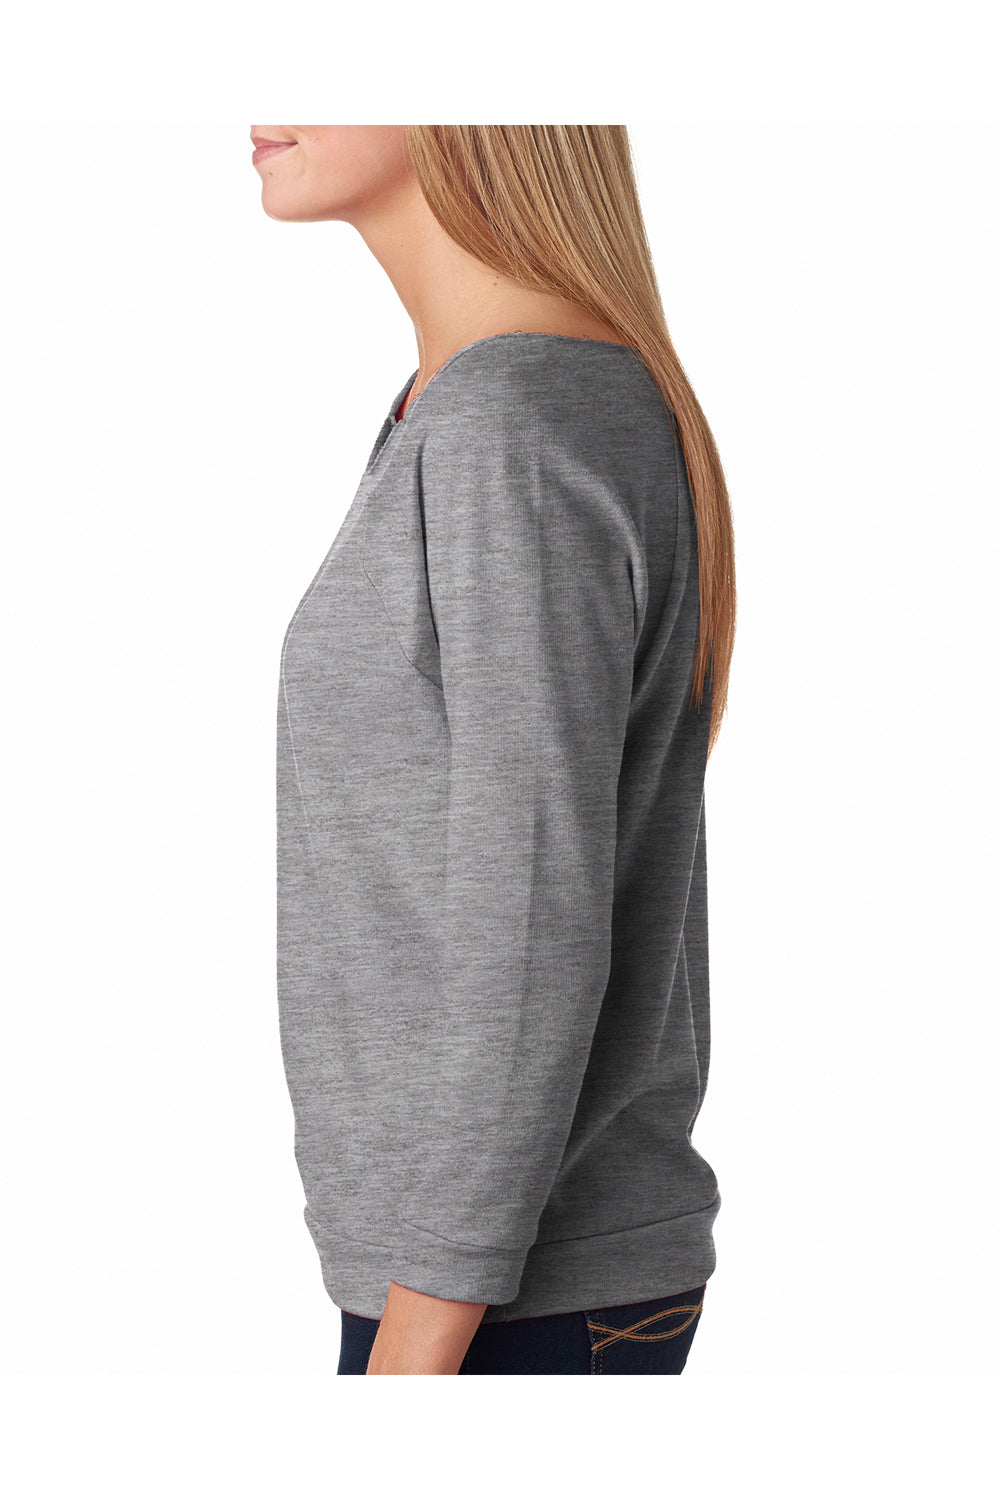 Next Level Ladies' French Terry 3/4-Sleeve Raglan Pullover Raw